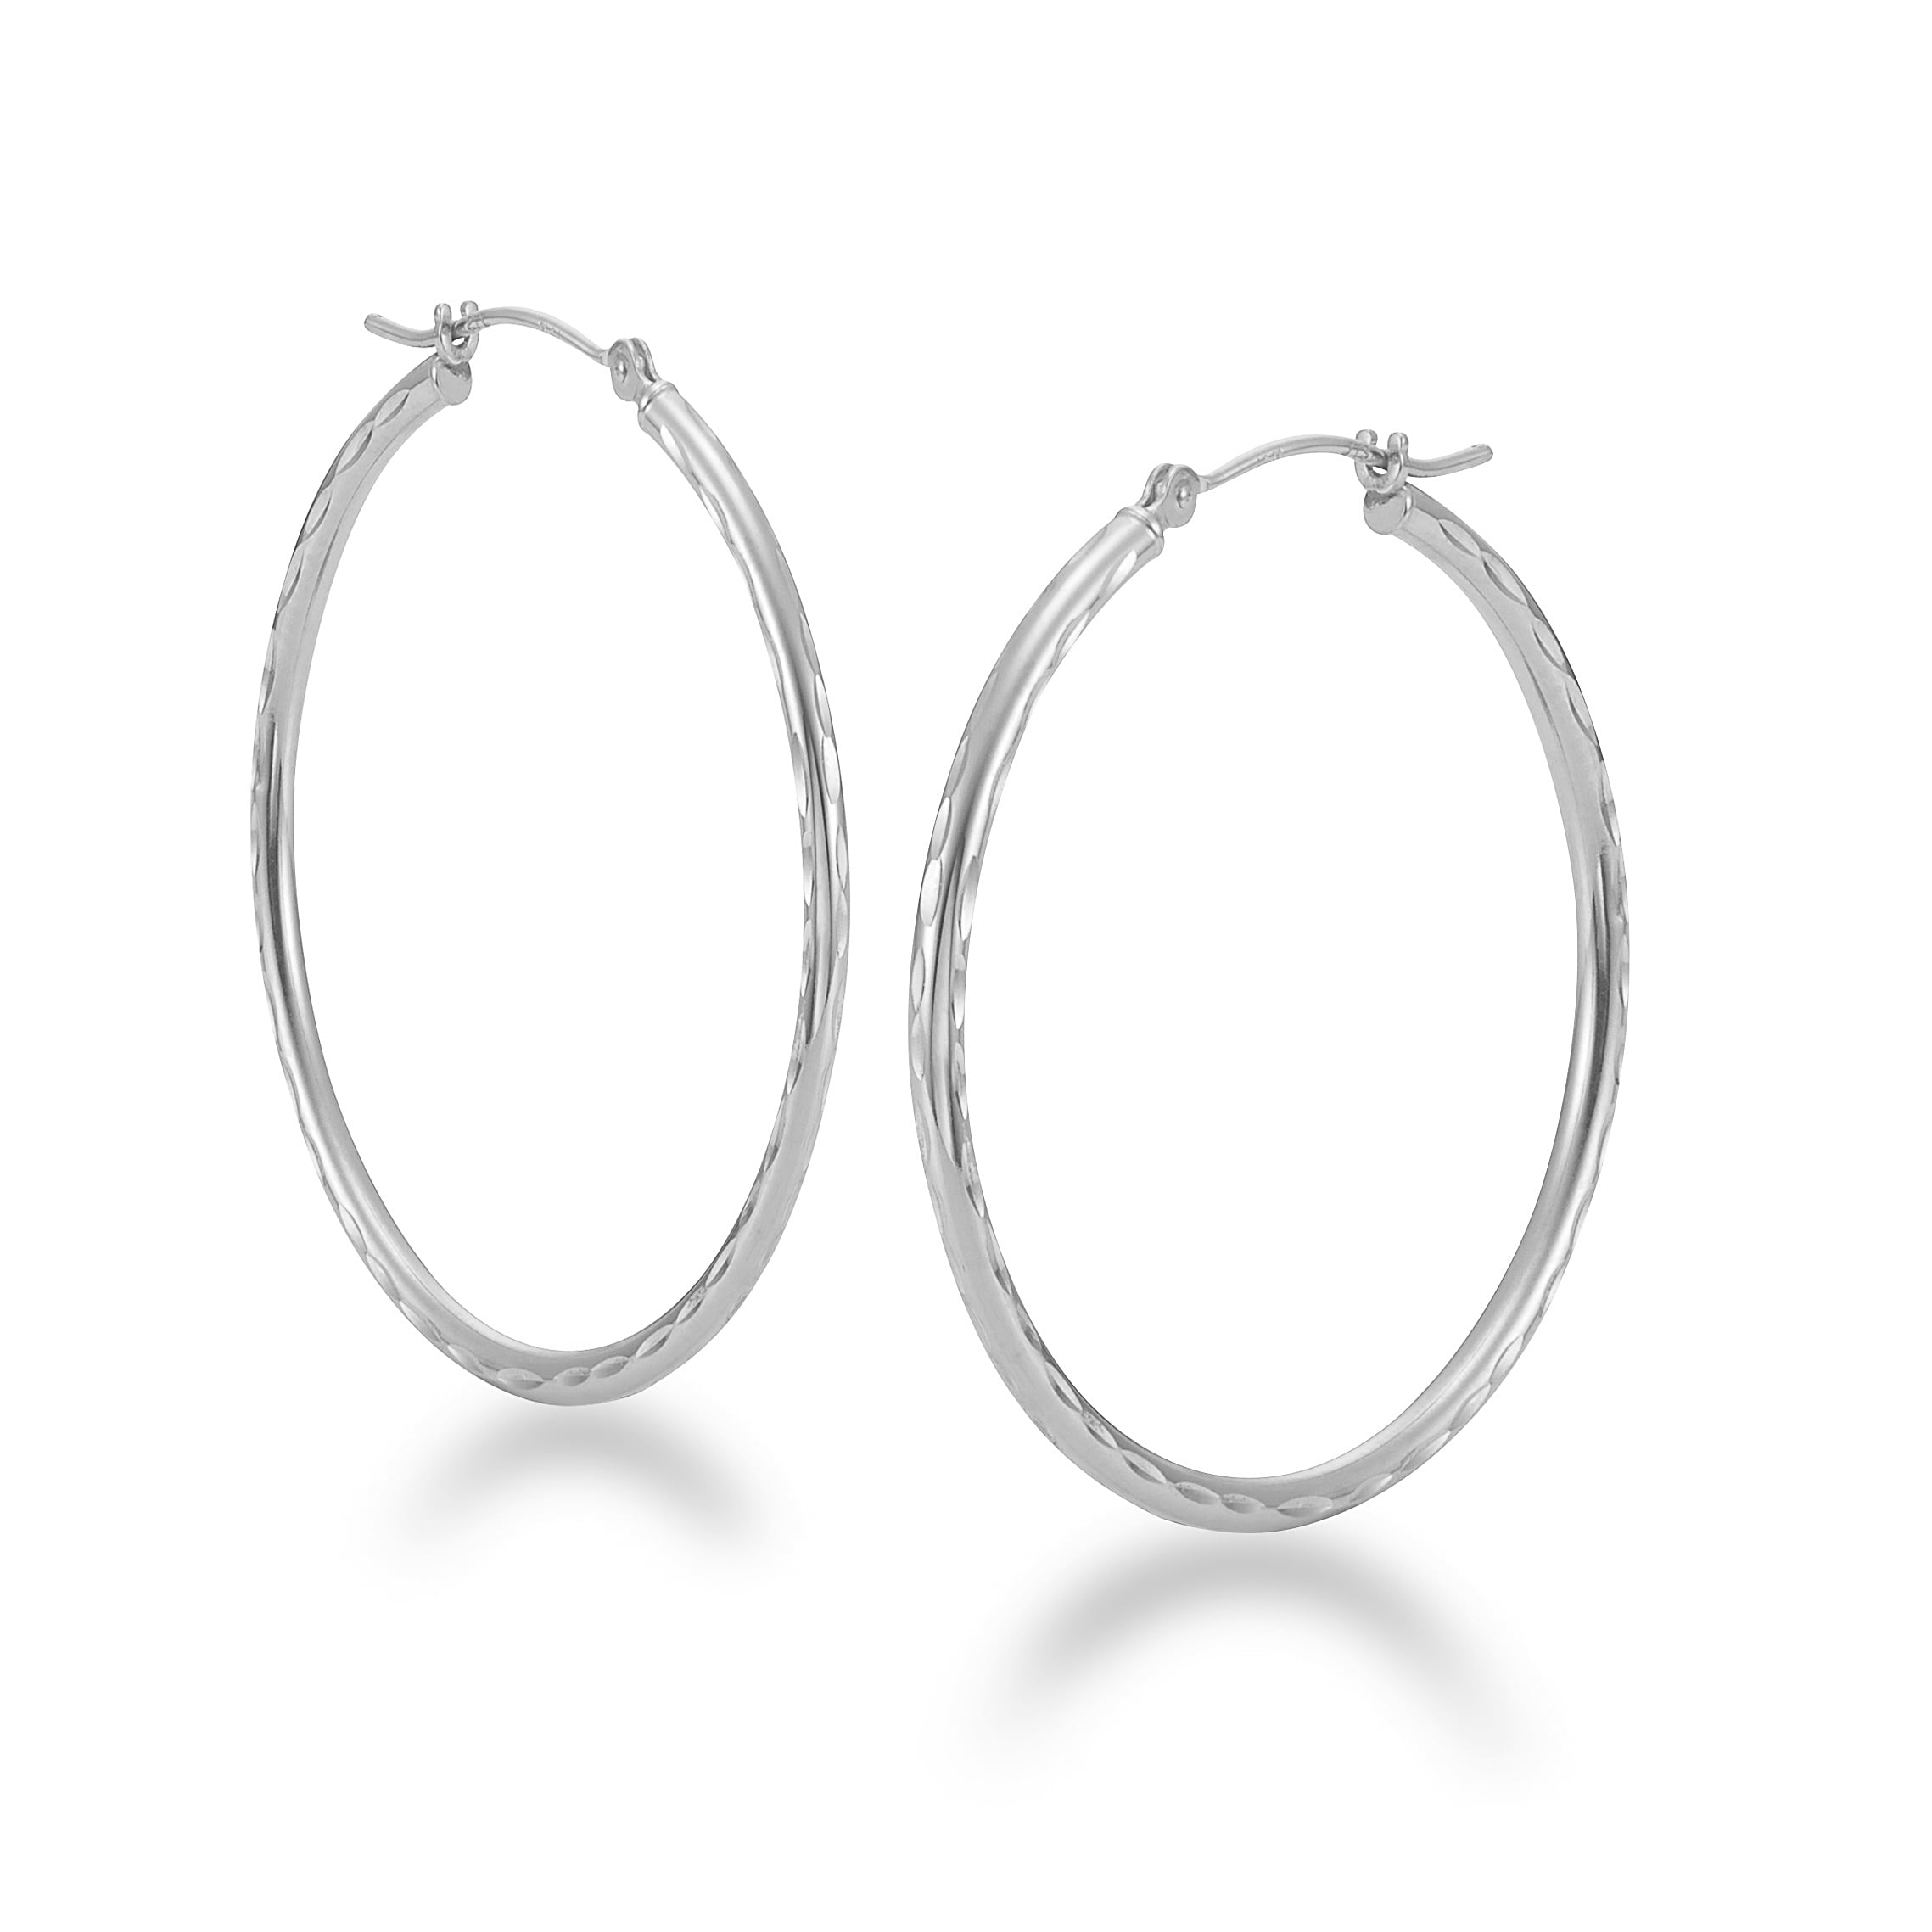 Yumay-14K White Gold Plated Filled Creole Diamond Cut Hoop Earrings for Womens and Girls 40mm